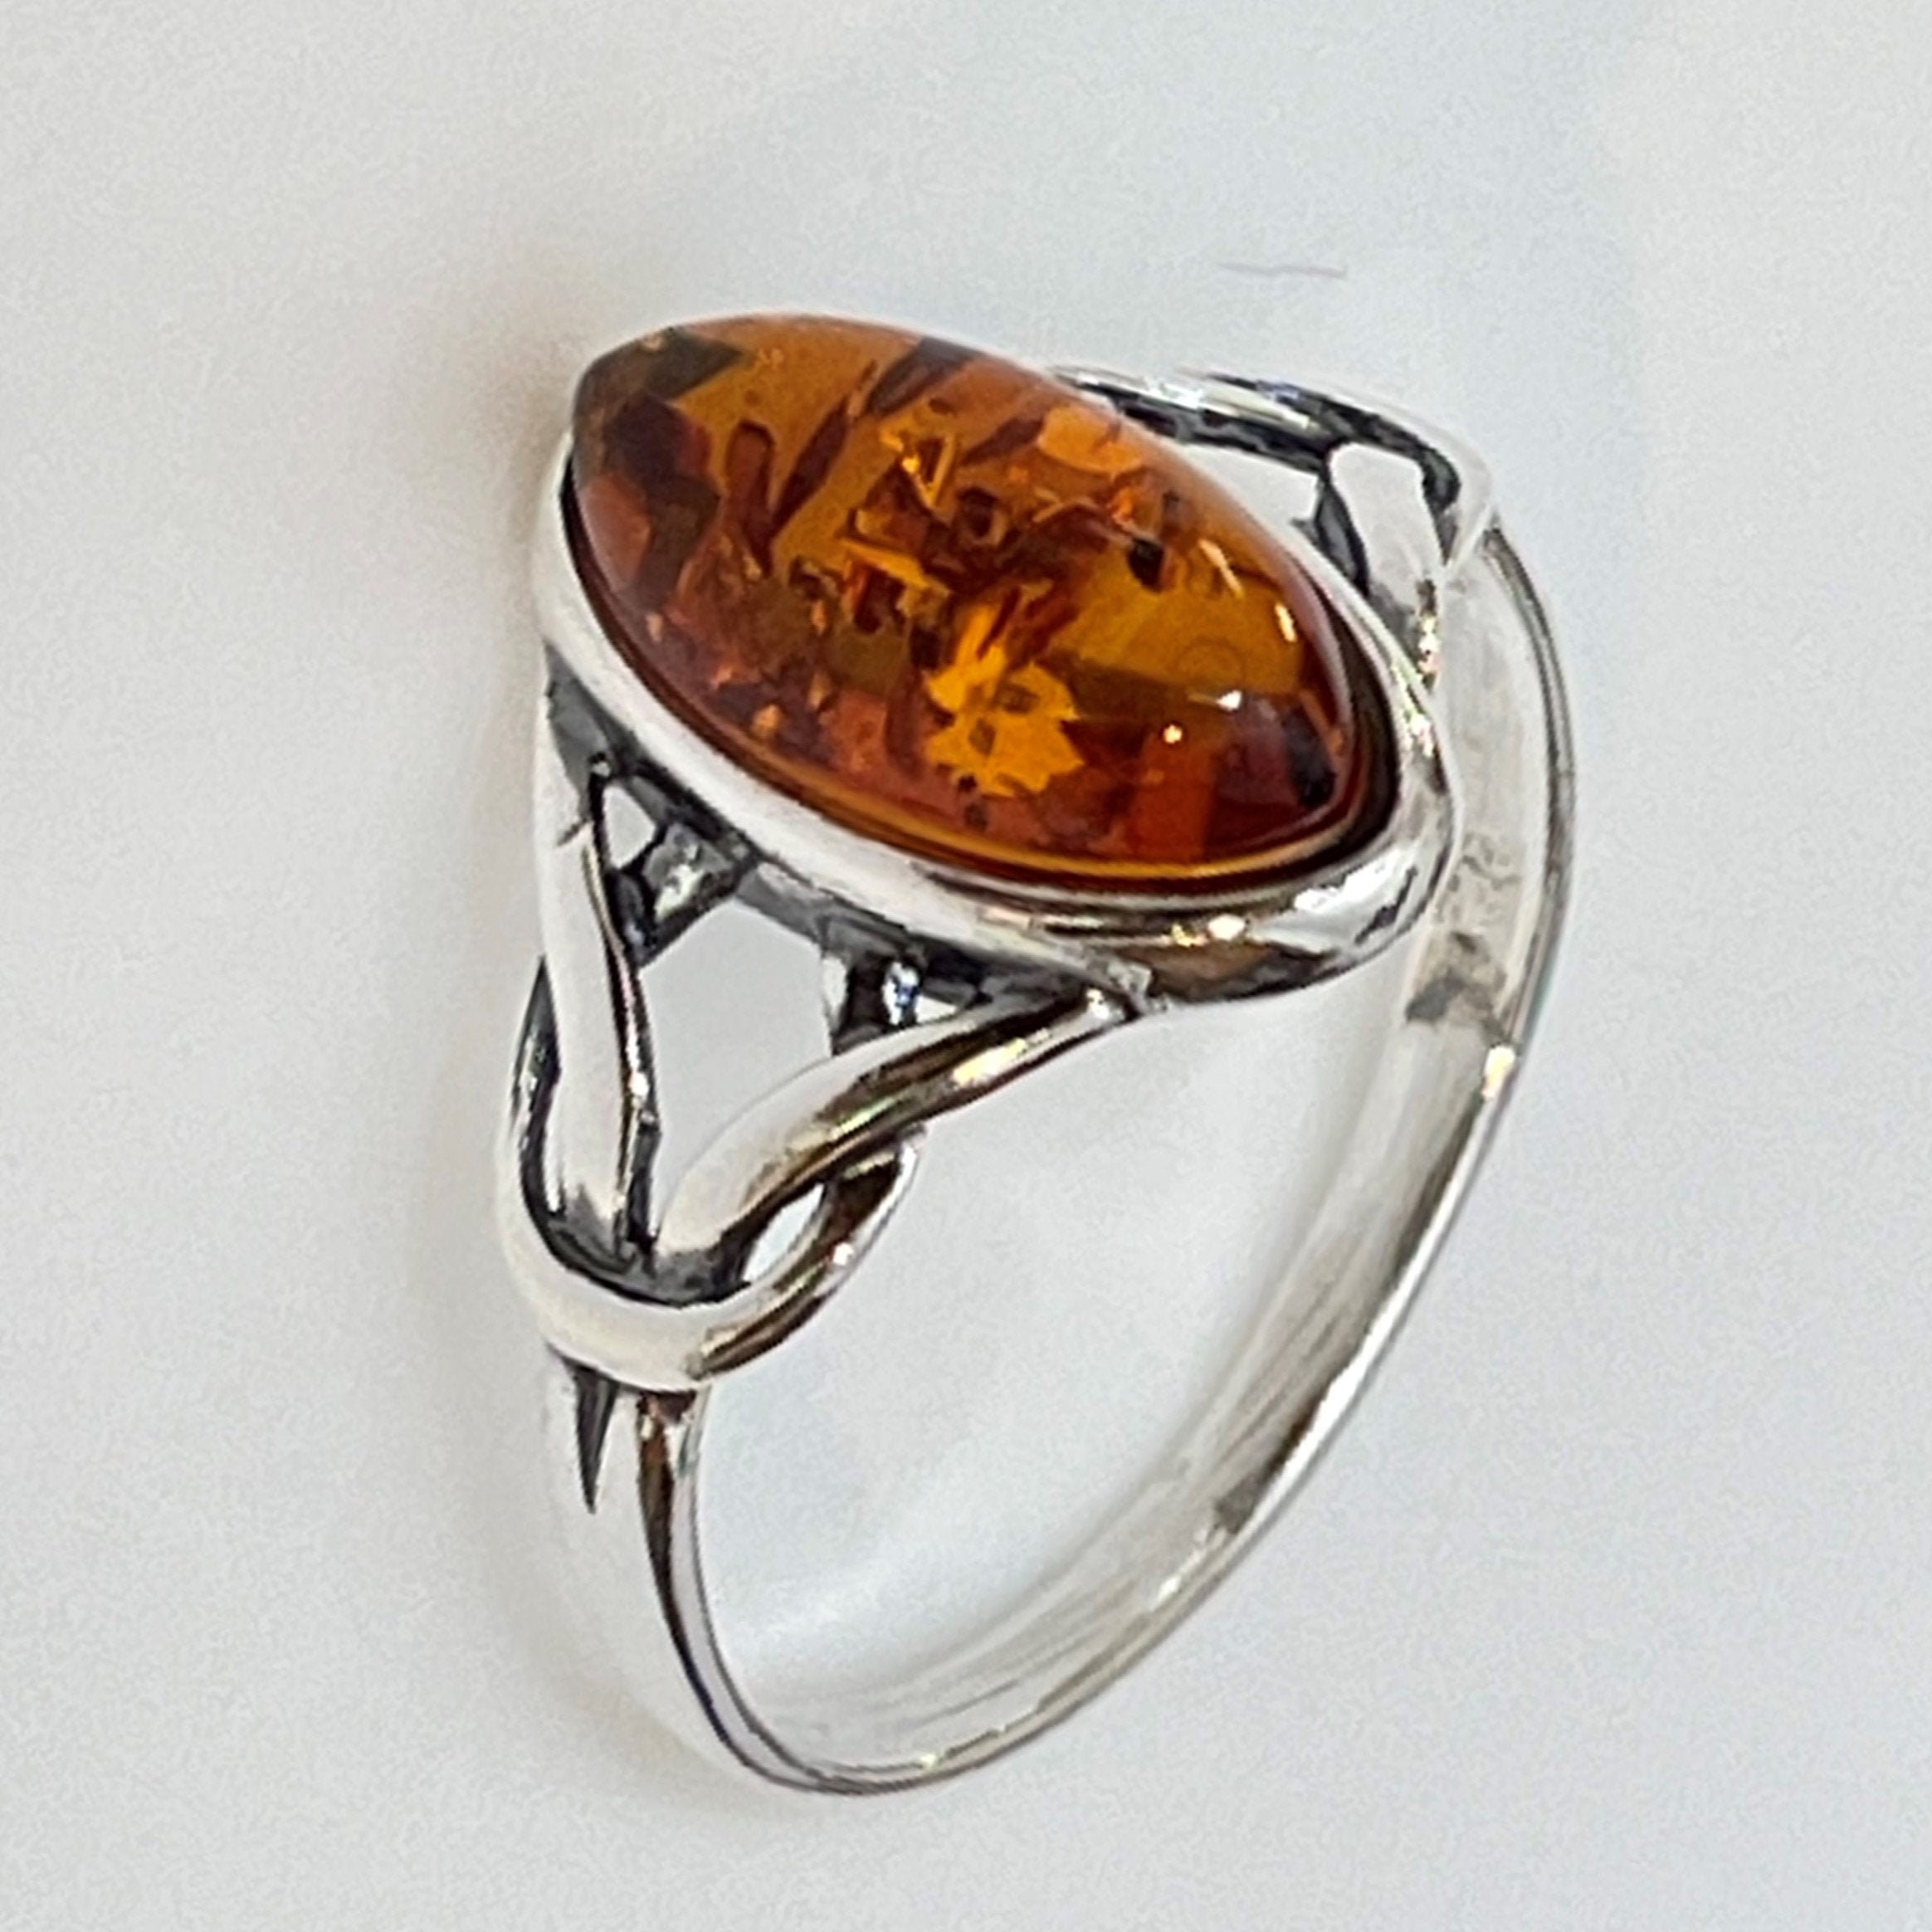 Women's Jewelry Romantic Stone Gift Amber Silver Ring Genuine Amber Natural Baltic Amber Infinity Ring Baltic Amber Jewelry